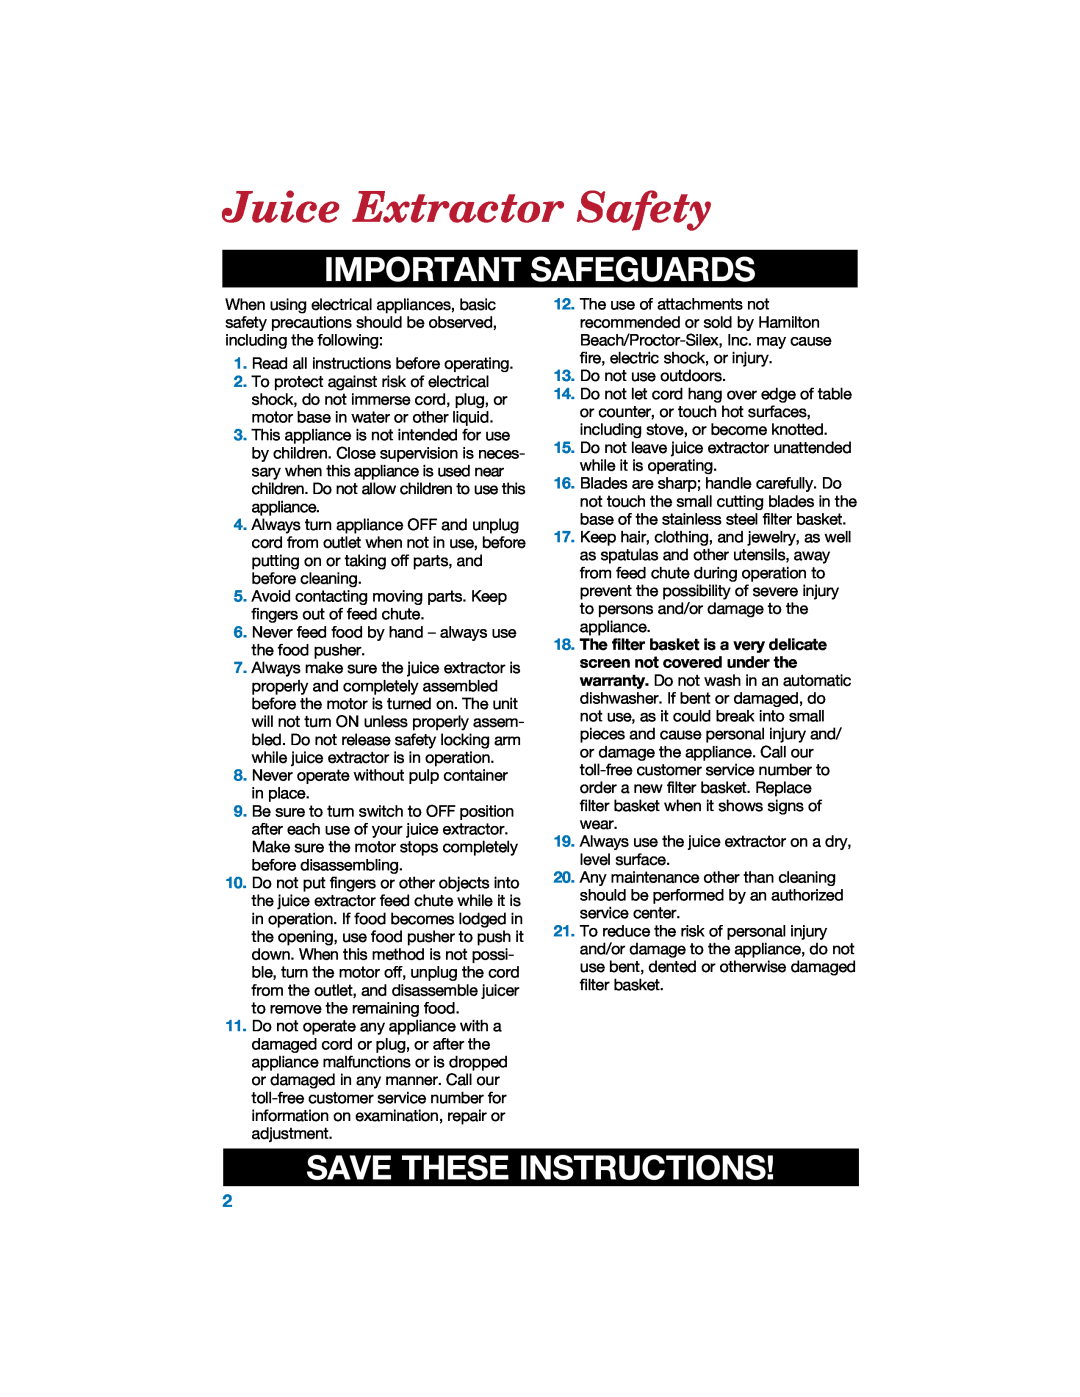 Hamilton Beach 840067800 manual Juice Extractor Safety, Important Safeguards, Save These Instructions 